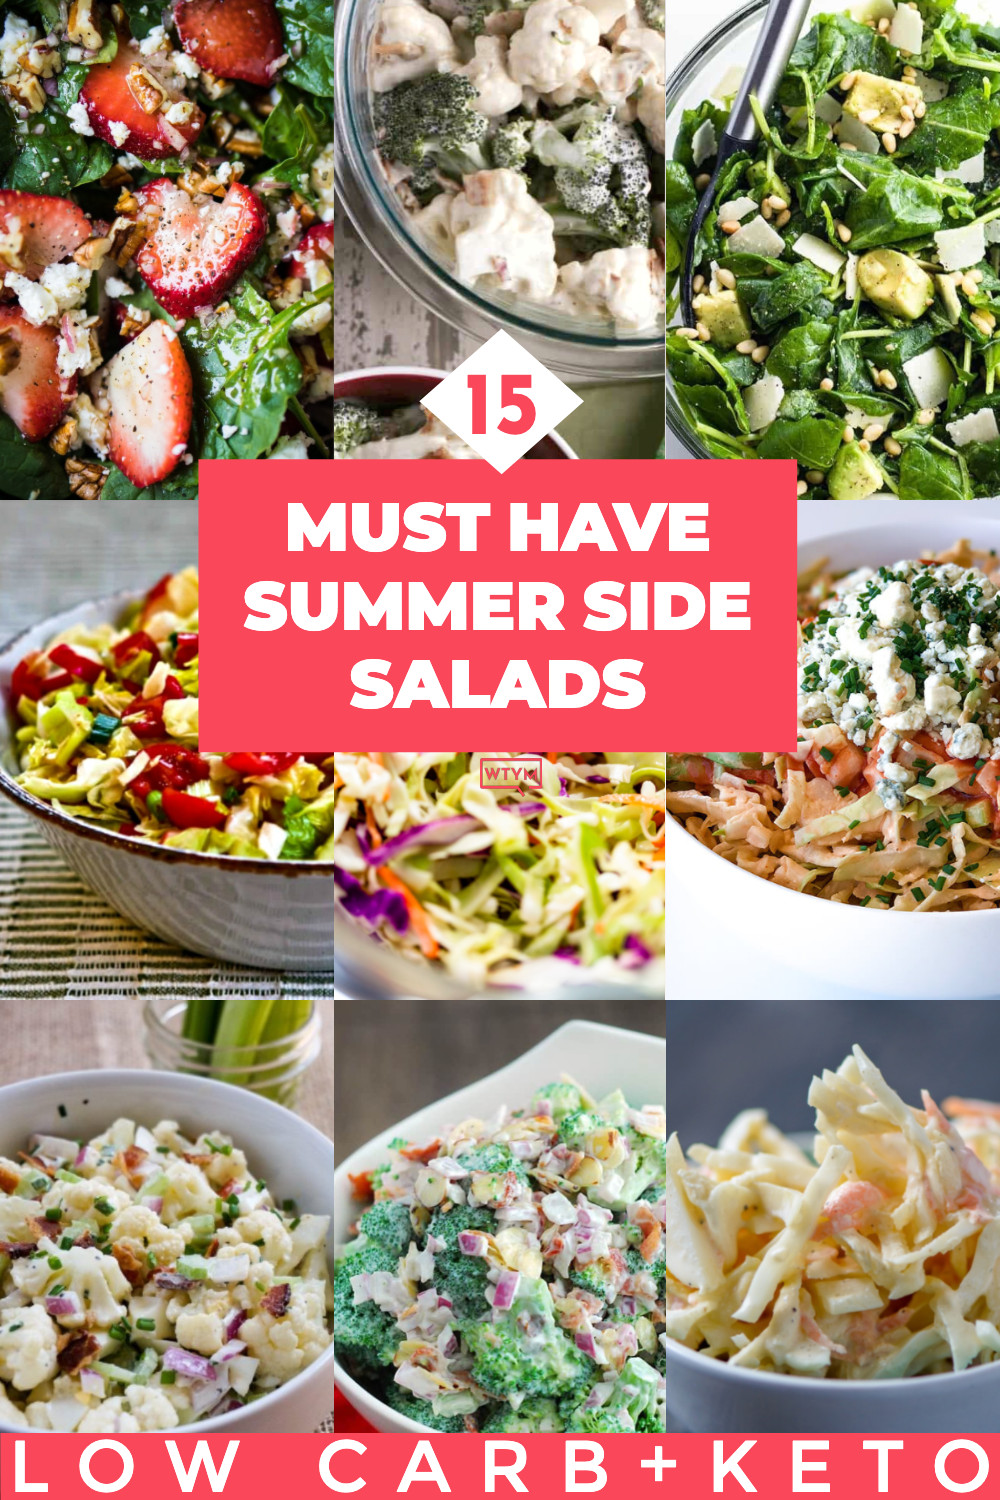 Keto Side Dishes For Bbq
 Keto Summer Side Dishes 35 Easy Low Carb Keto Side Dish